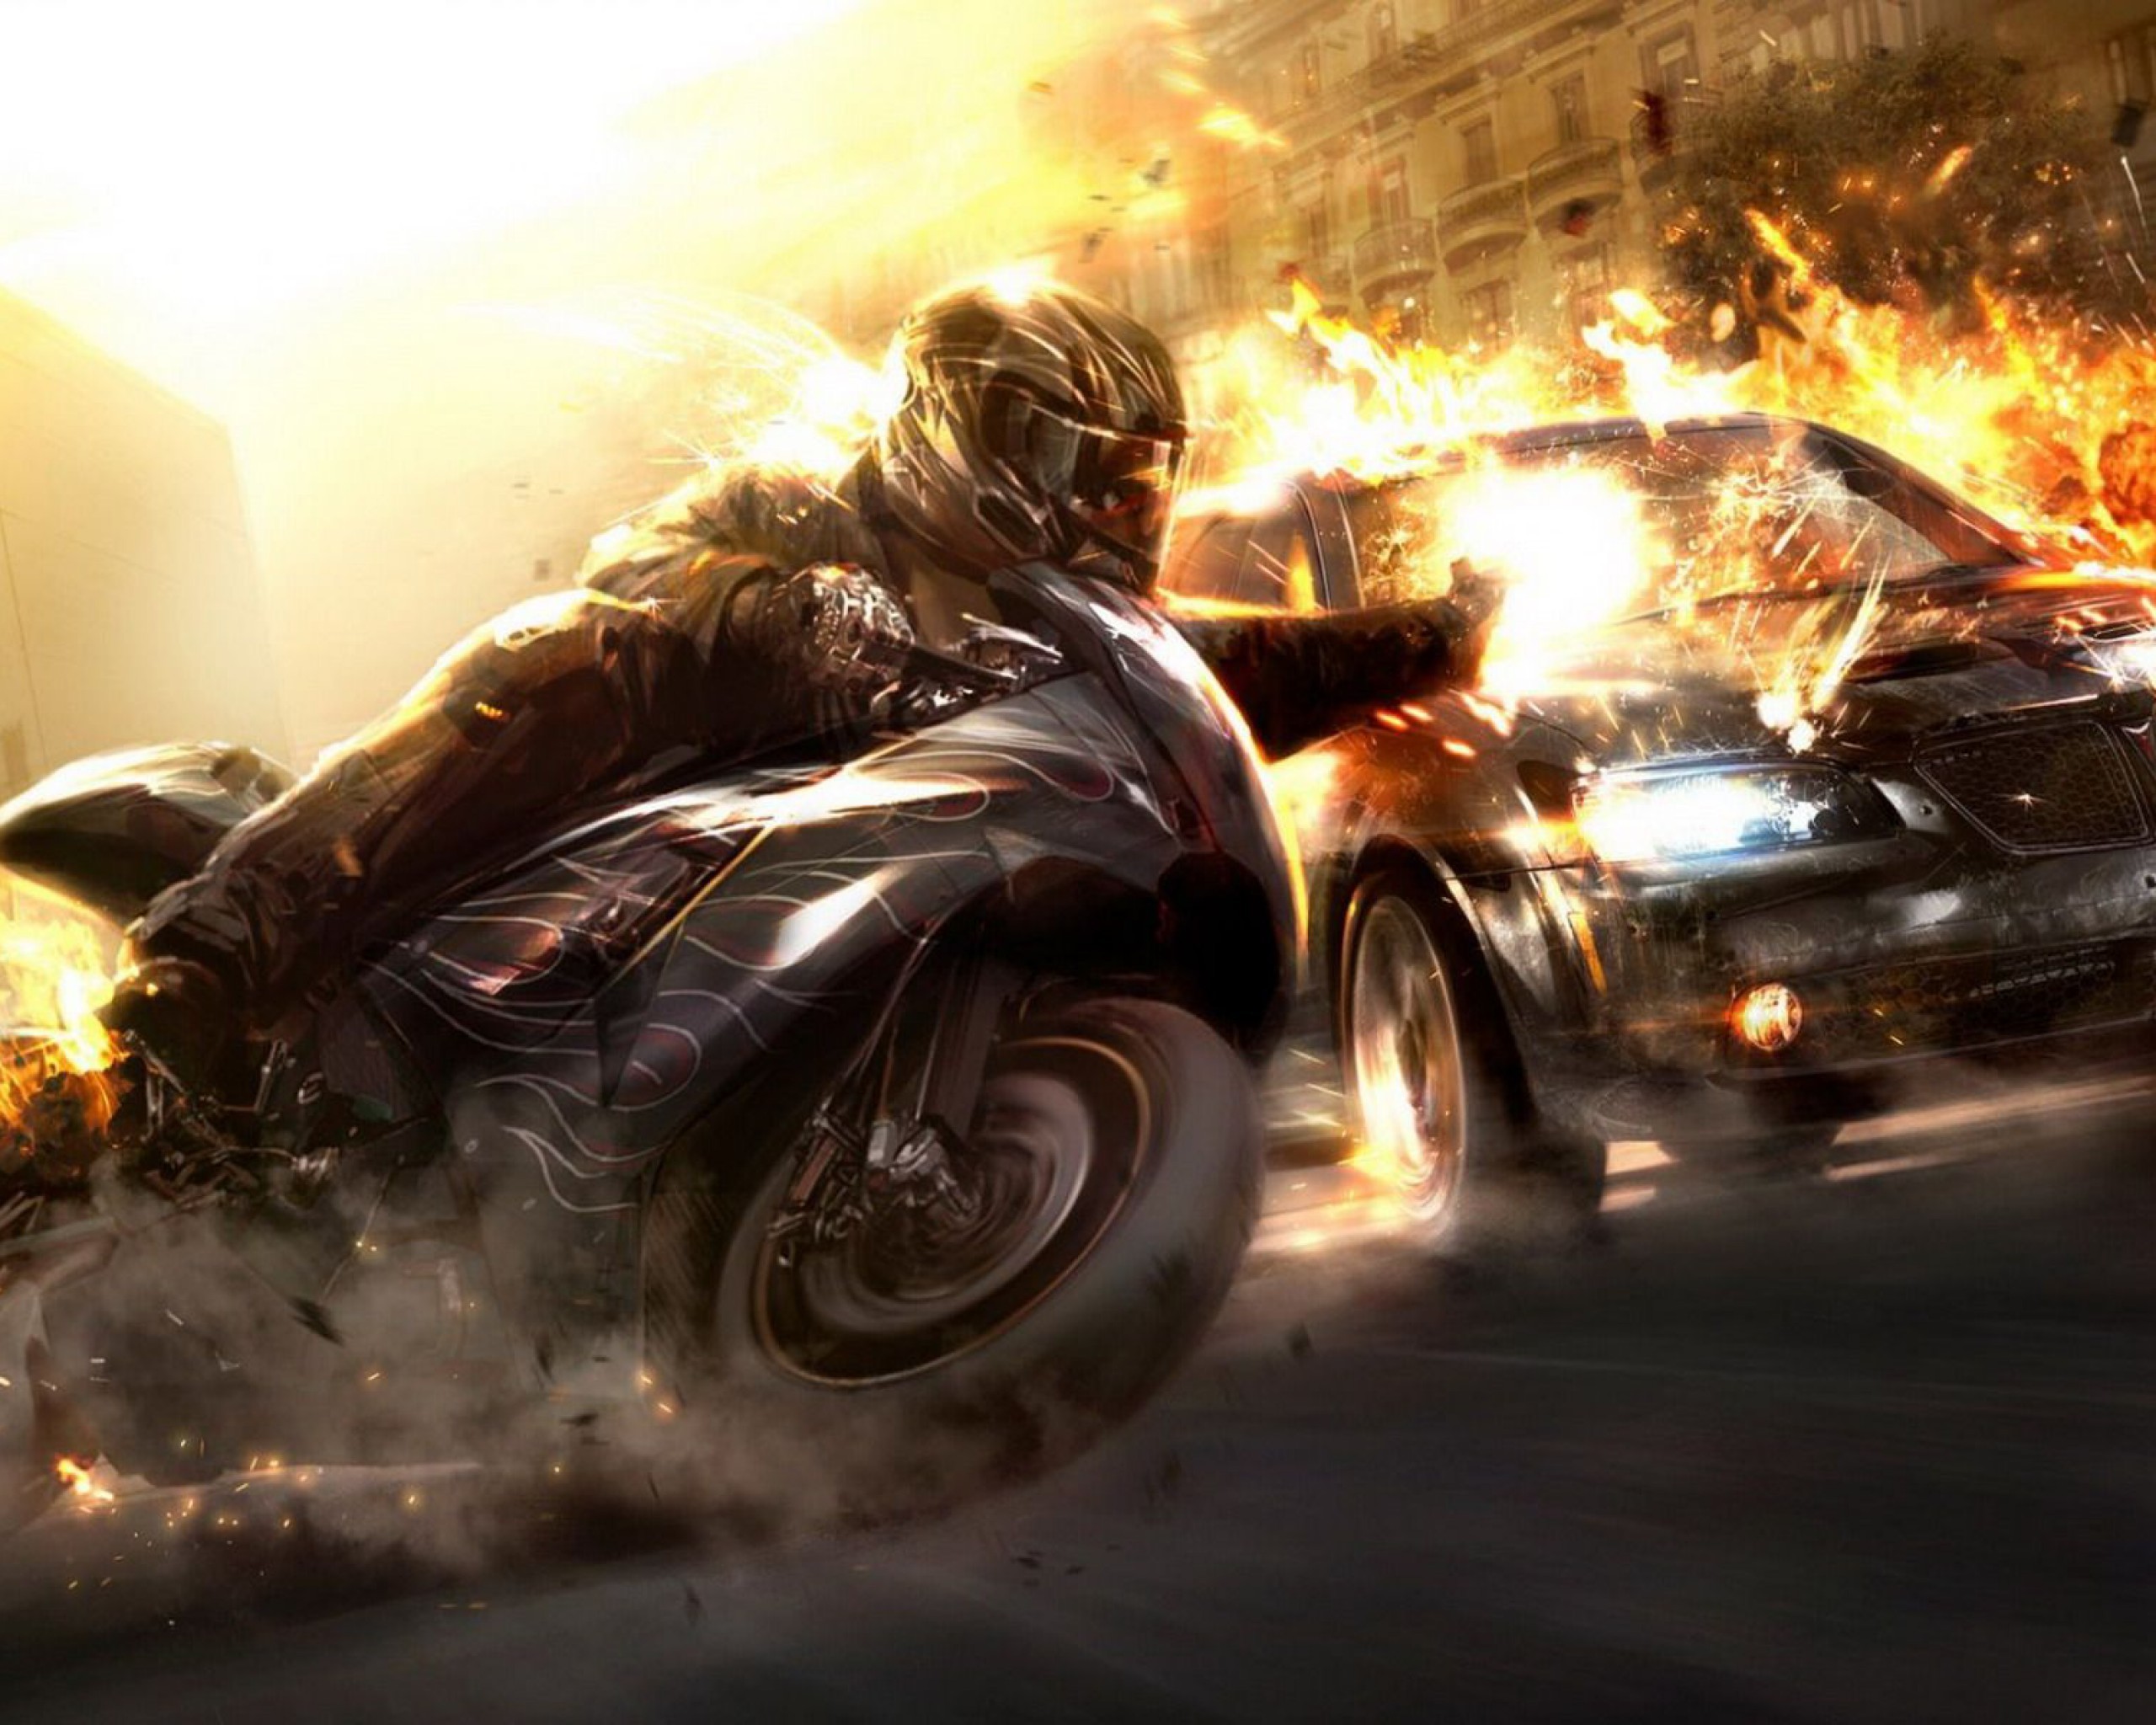 General 2560x2048 Ubisoft video games motorcycle car fire